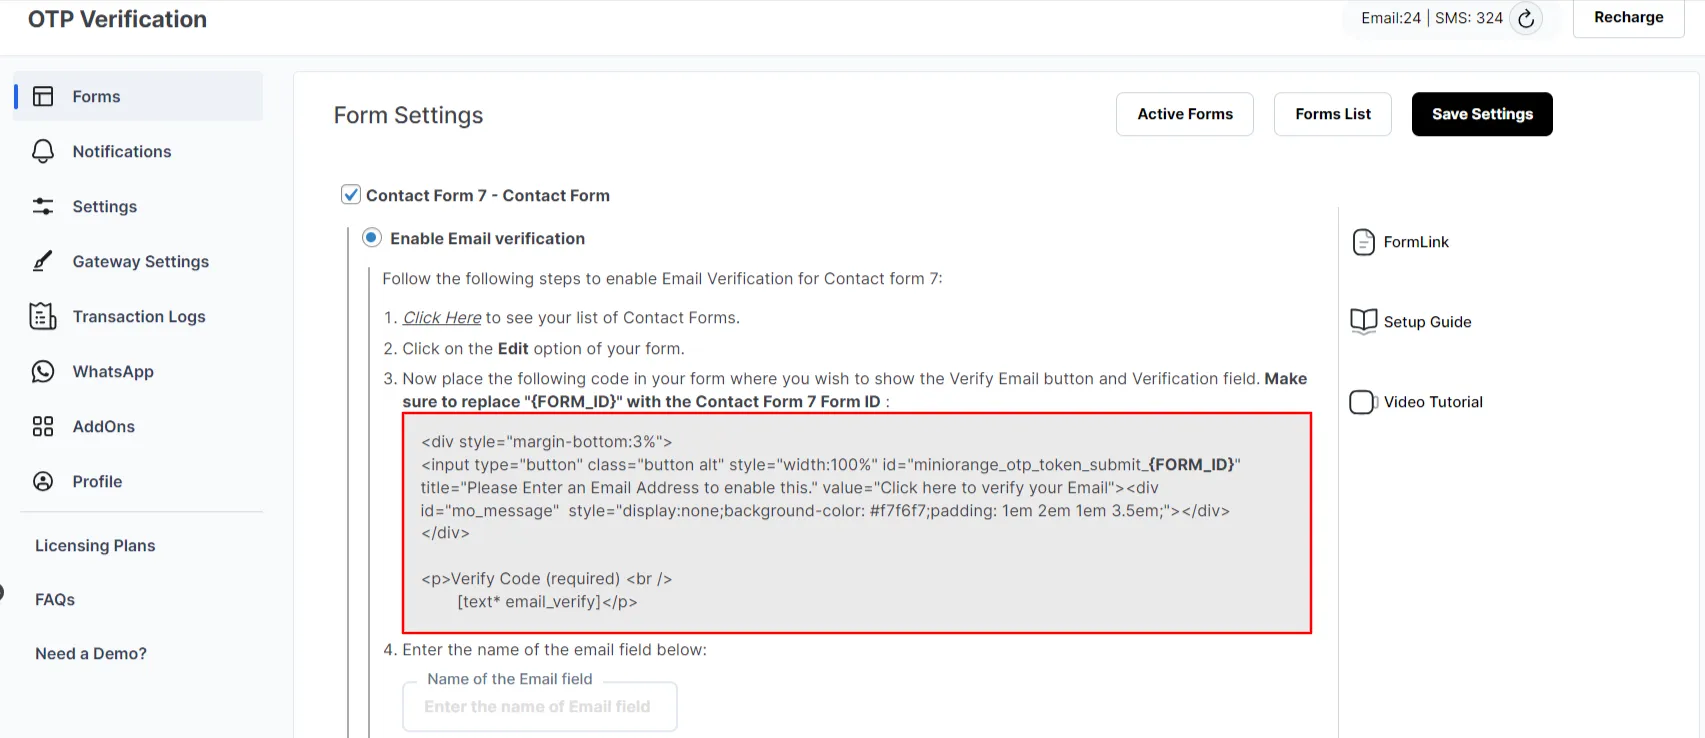 Contact form 7 SMS Verification - Copy the Email field code